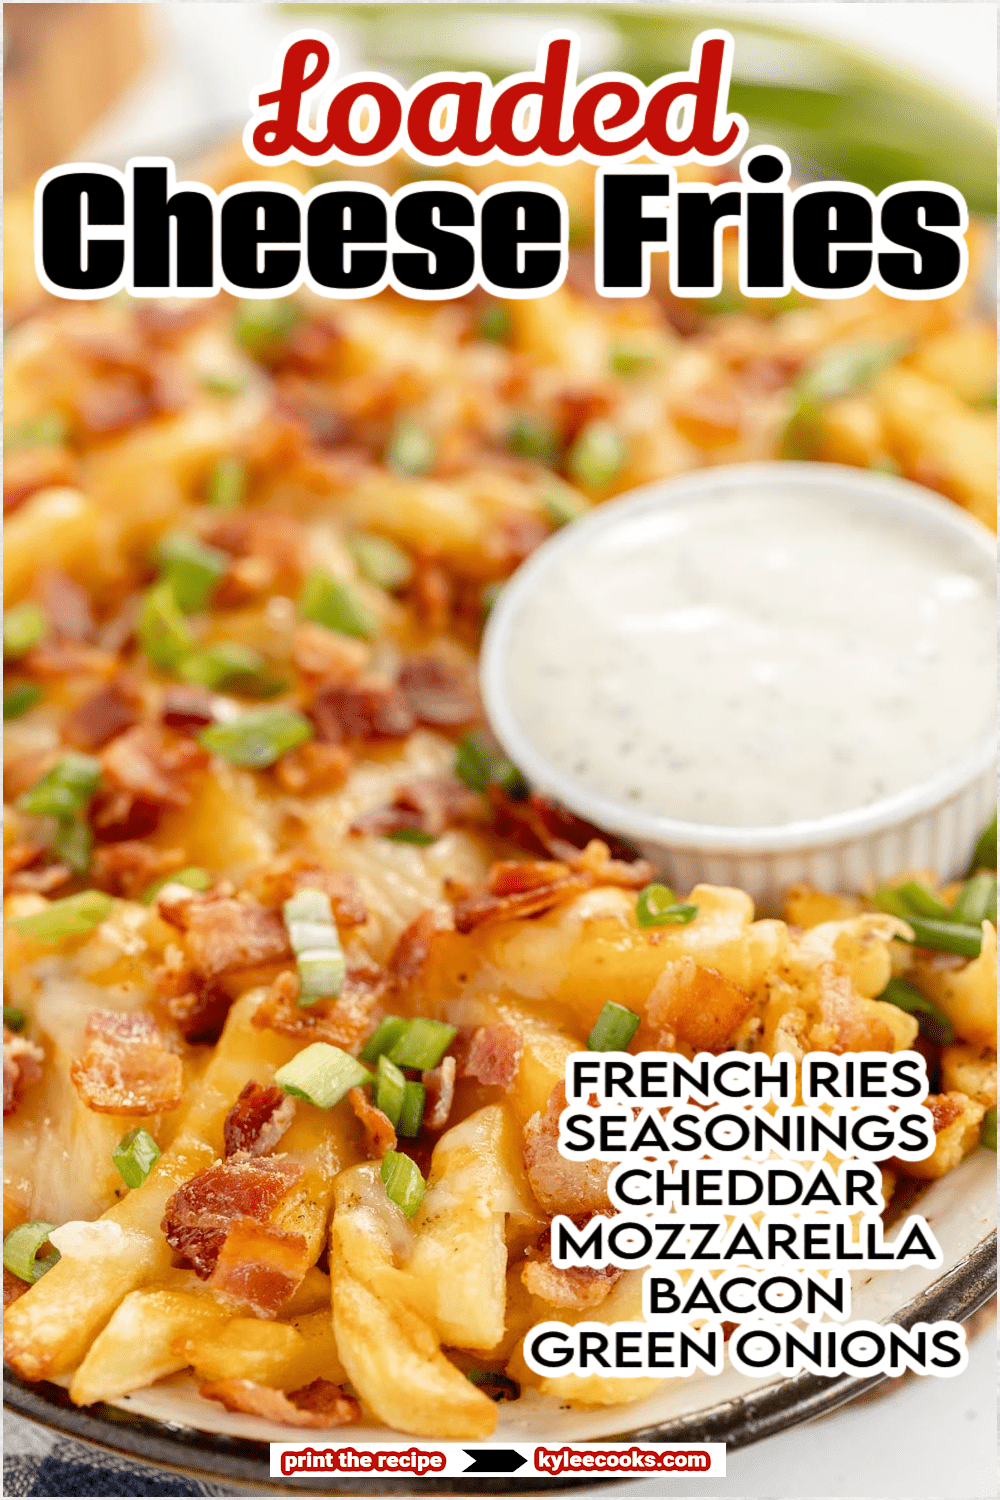 loaded cheese fries on a platter with recipe name overlaid in text.